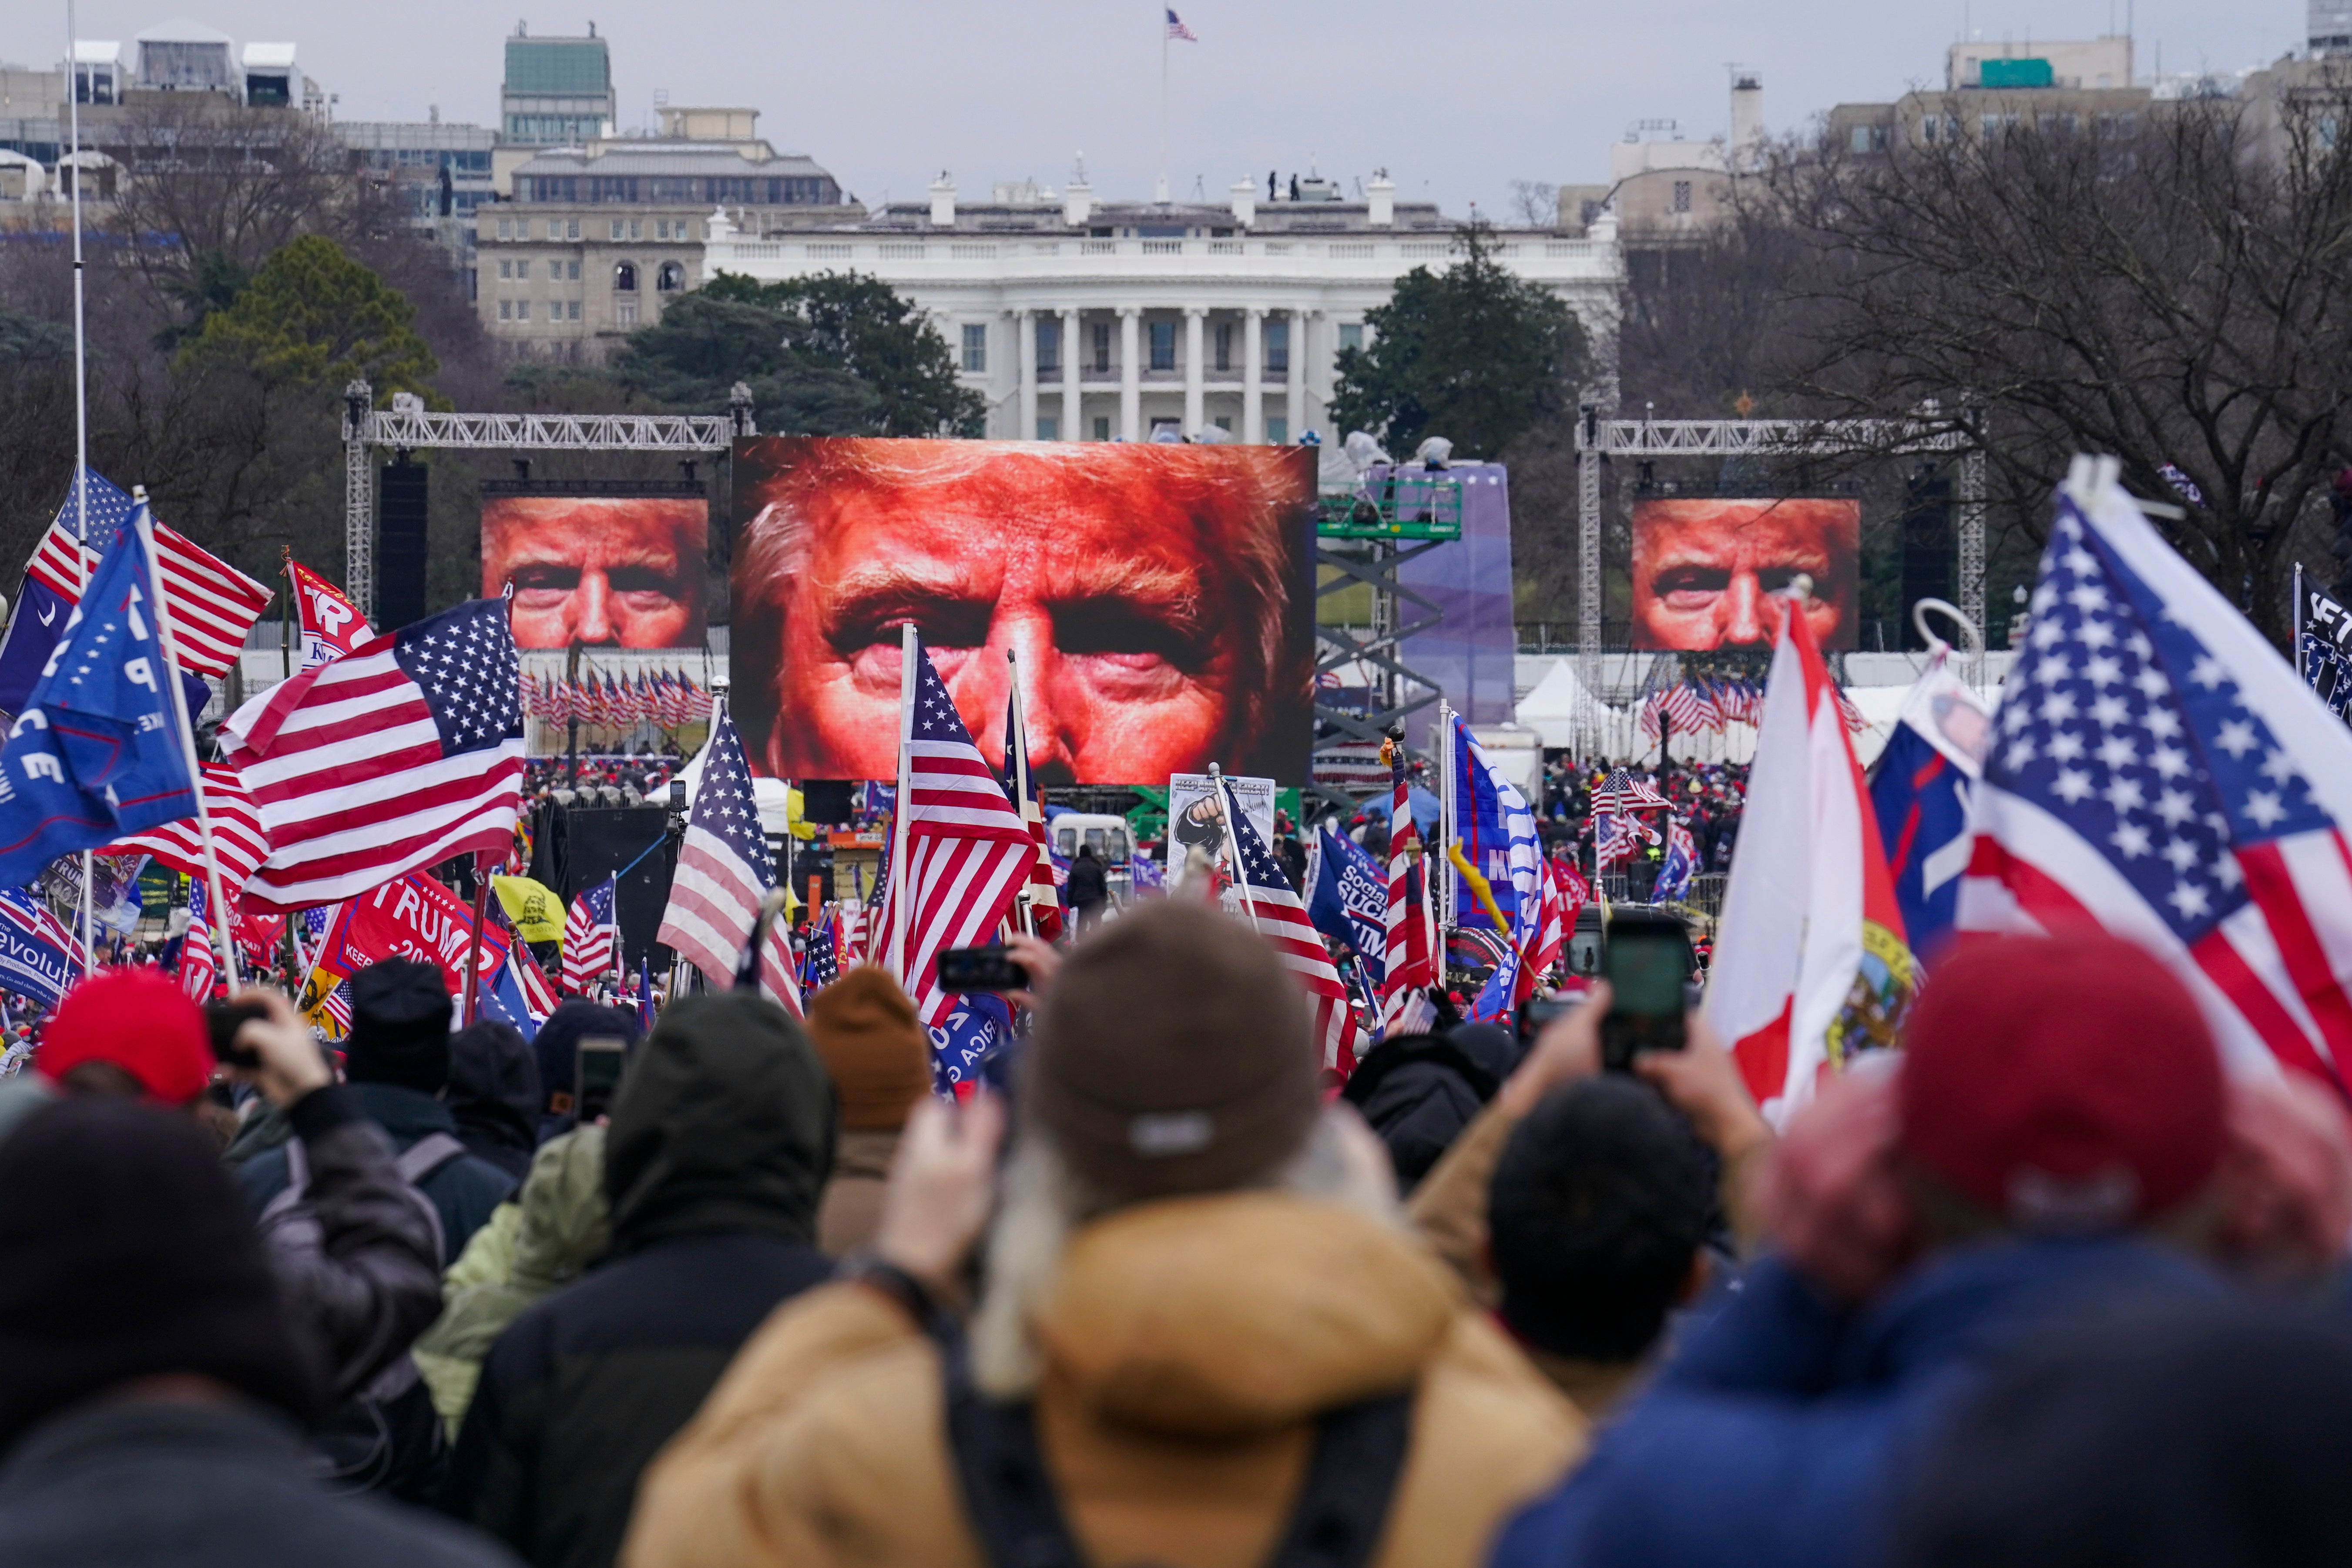 Supporters of former President Donald Trump rallied outside of the White House before heading to the Capitol on 6 January